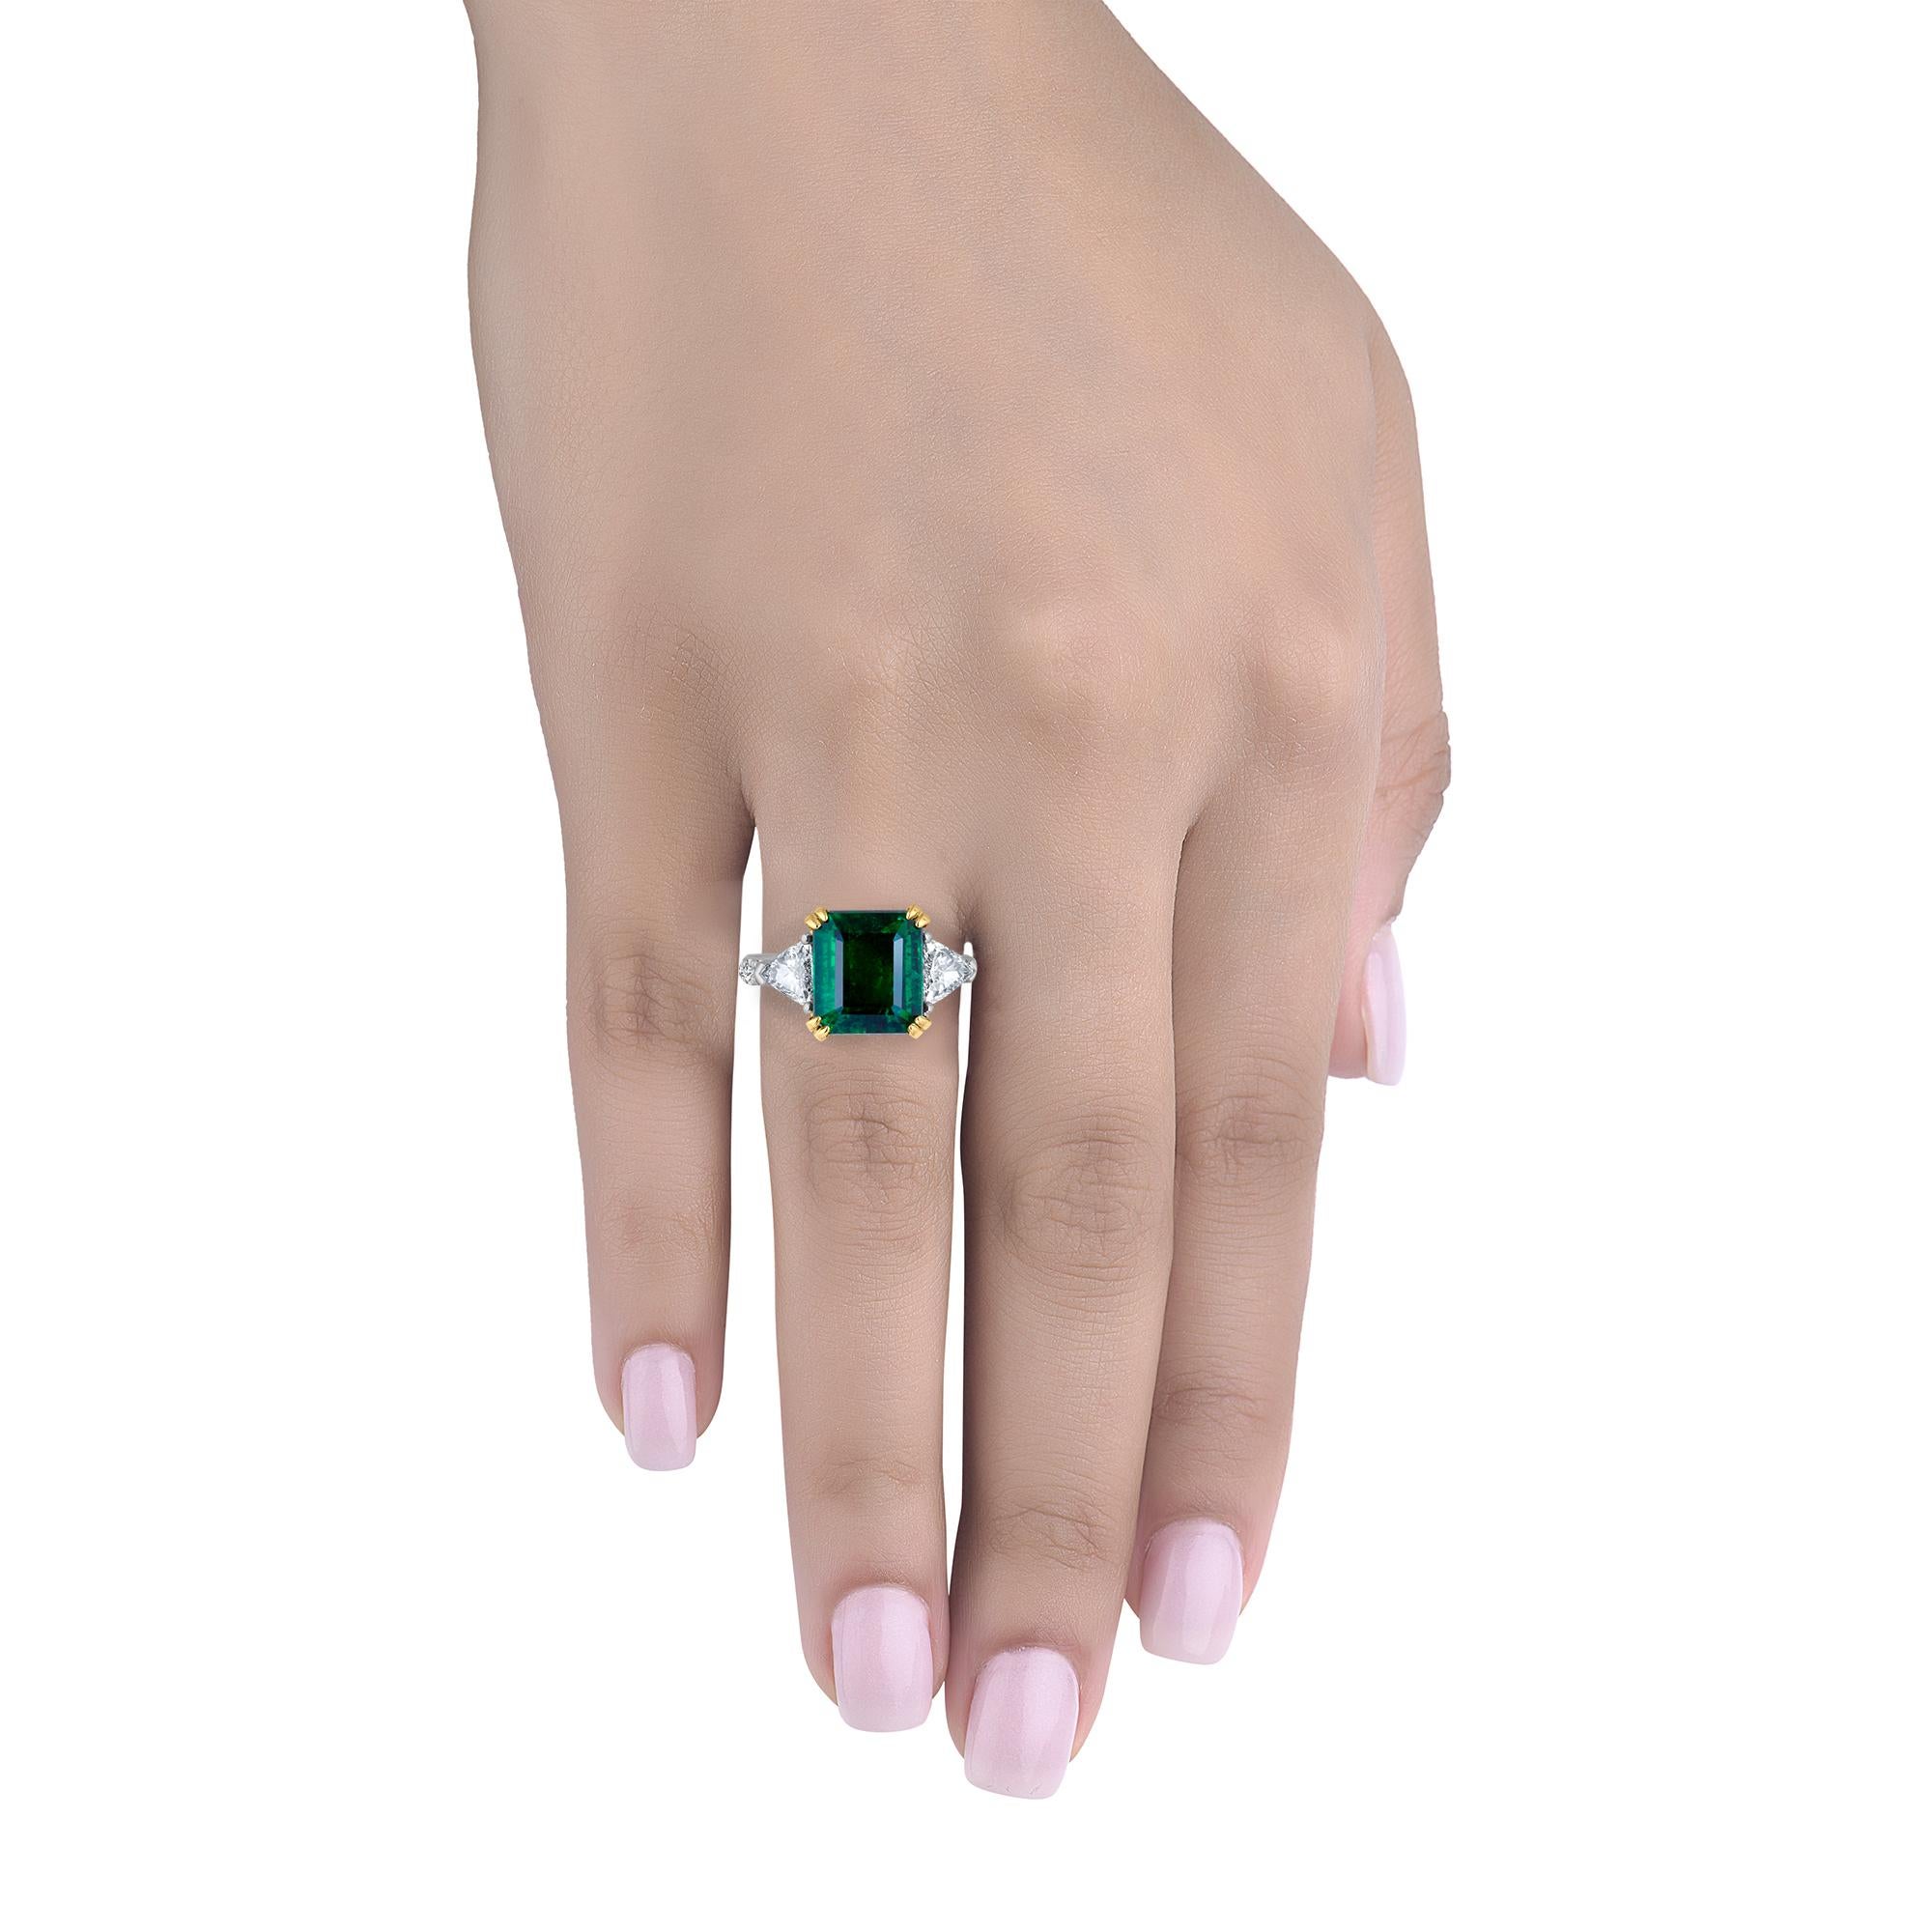 Hand made in the Emilio Jewelry Factory, A gorgeous Certified vivid green Emerald cut Zambian Genuine Emerald 3.28 Carats set in the center. The emerald is very clean and completely eye clean. Center Emerald Dimensions: 9.00mm Long and 8.00mm wide.